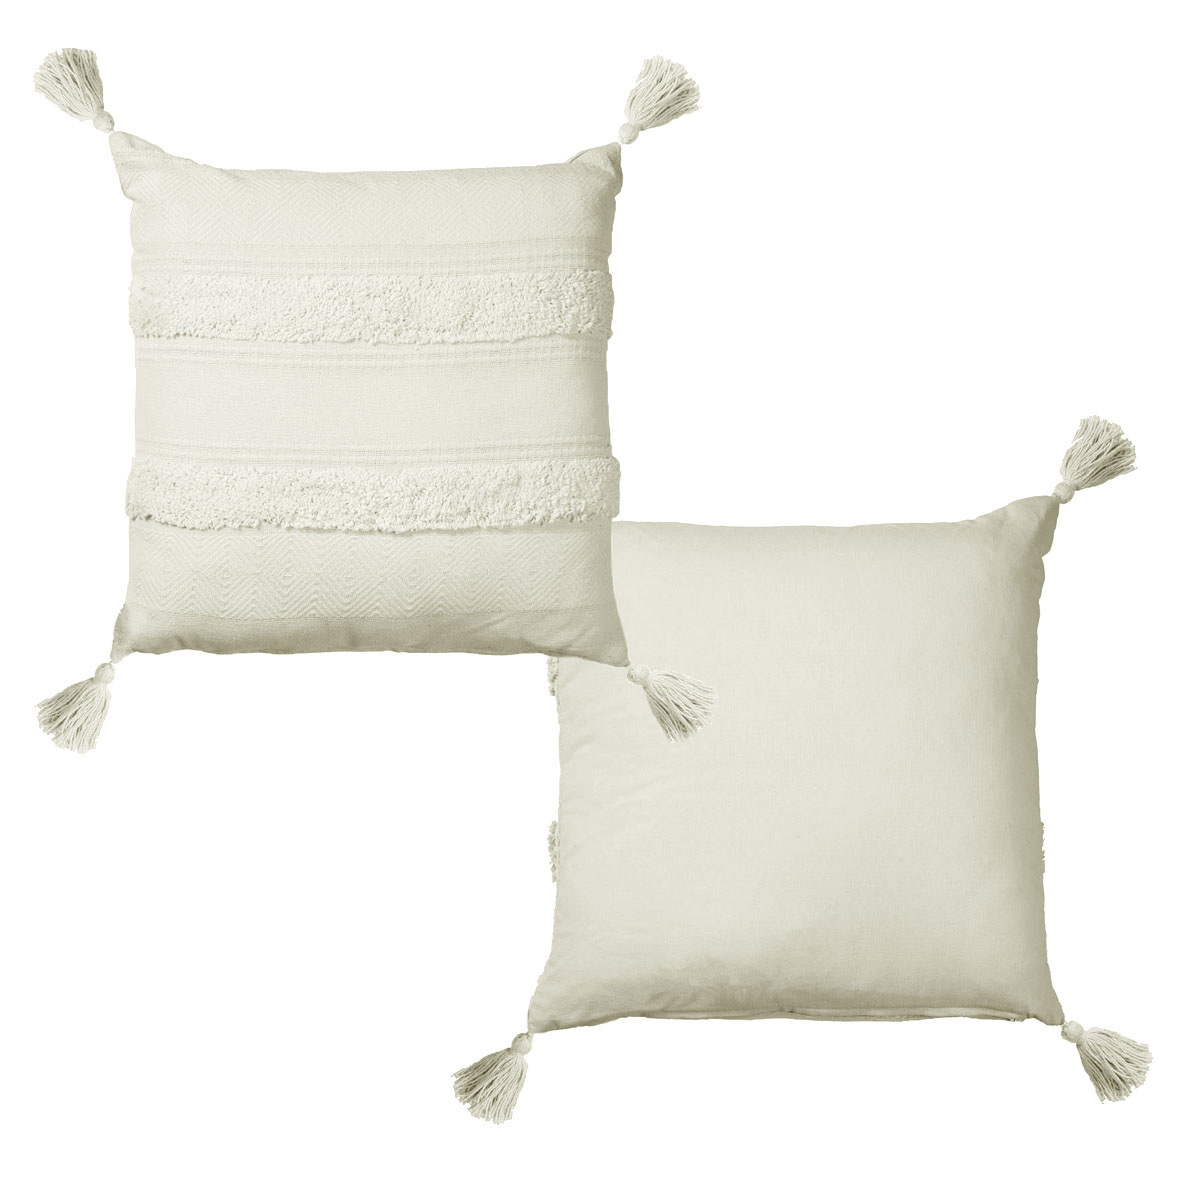 Accessorize Indra Cotton Cover Filled Cushion